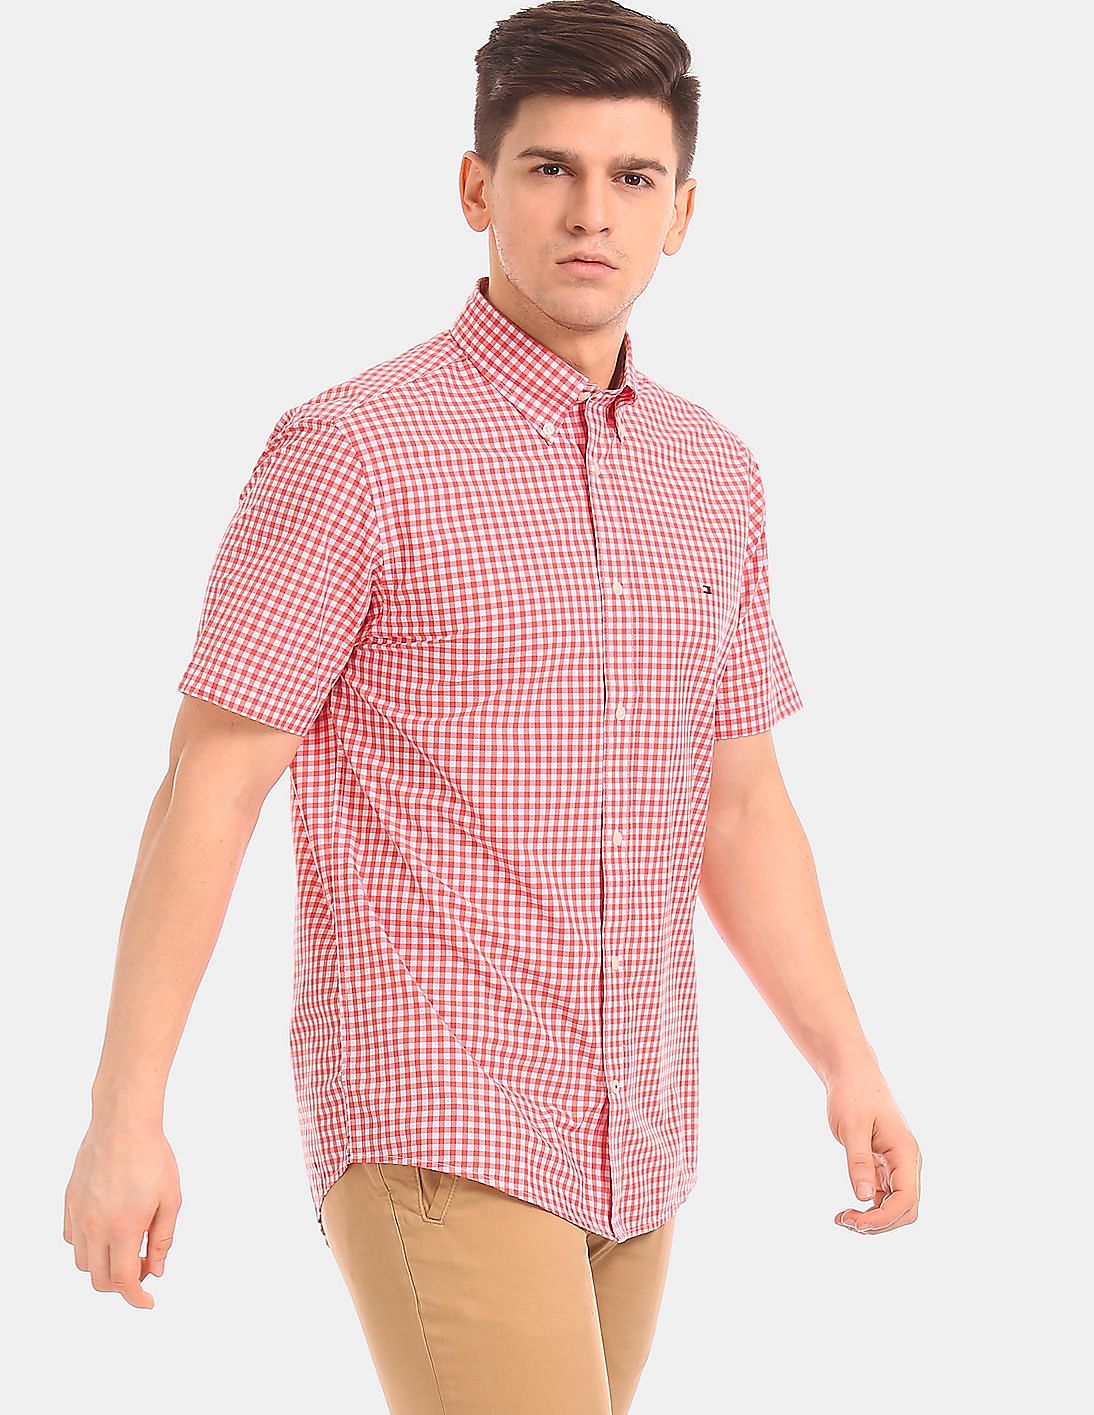 red button down shirts for men